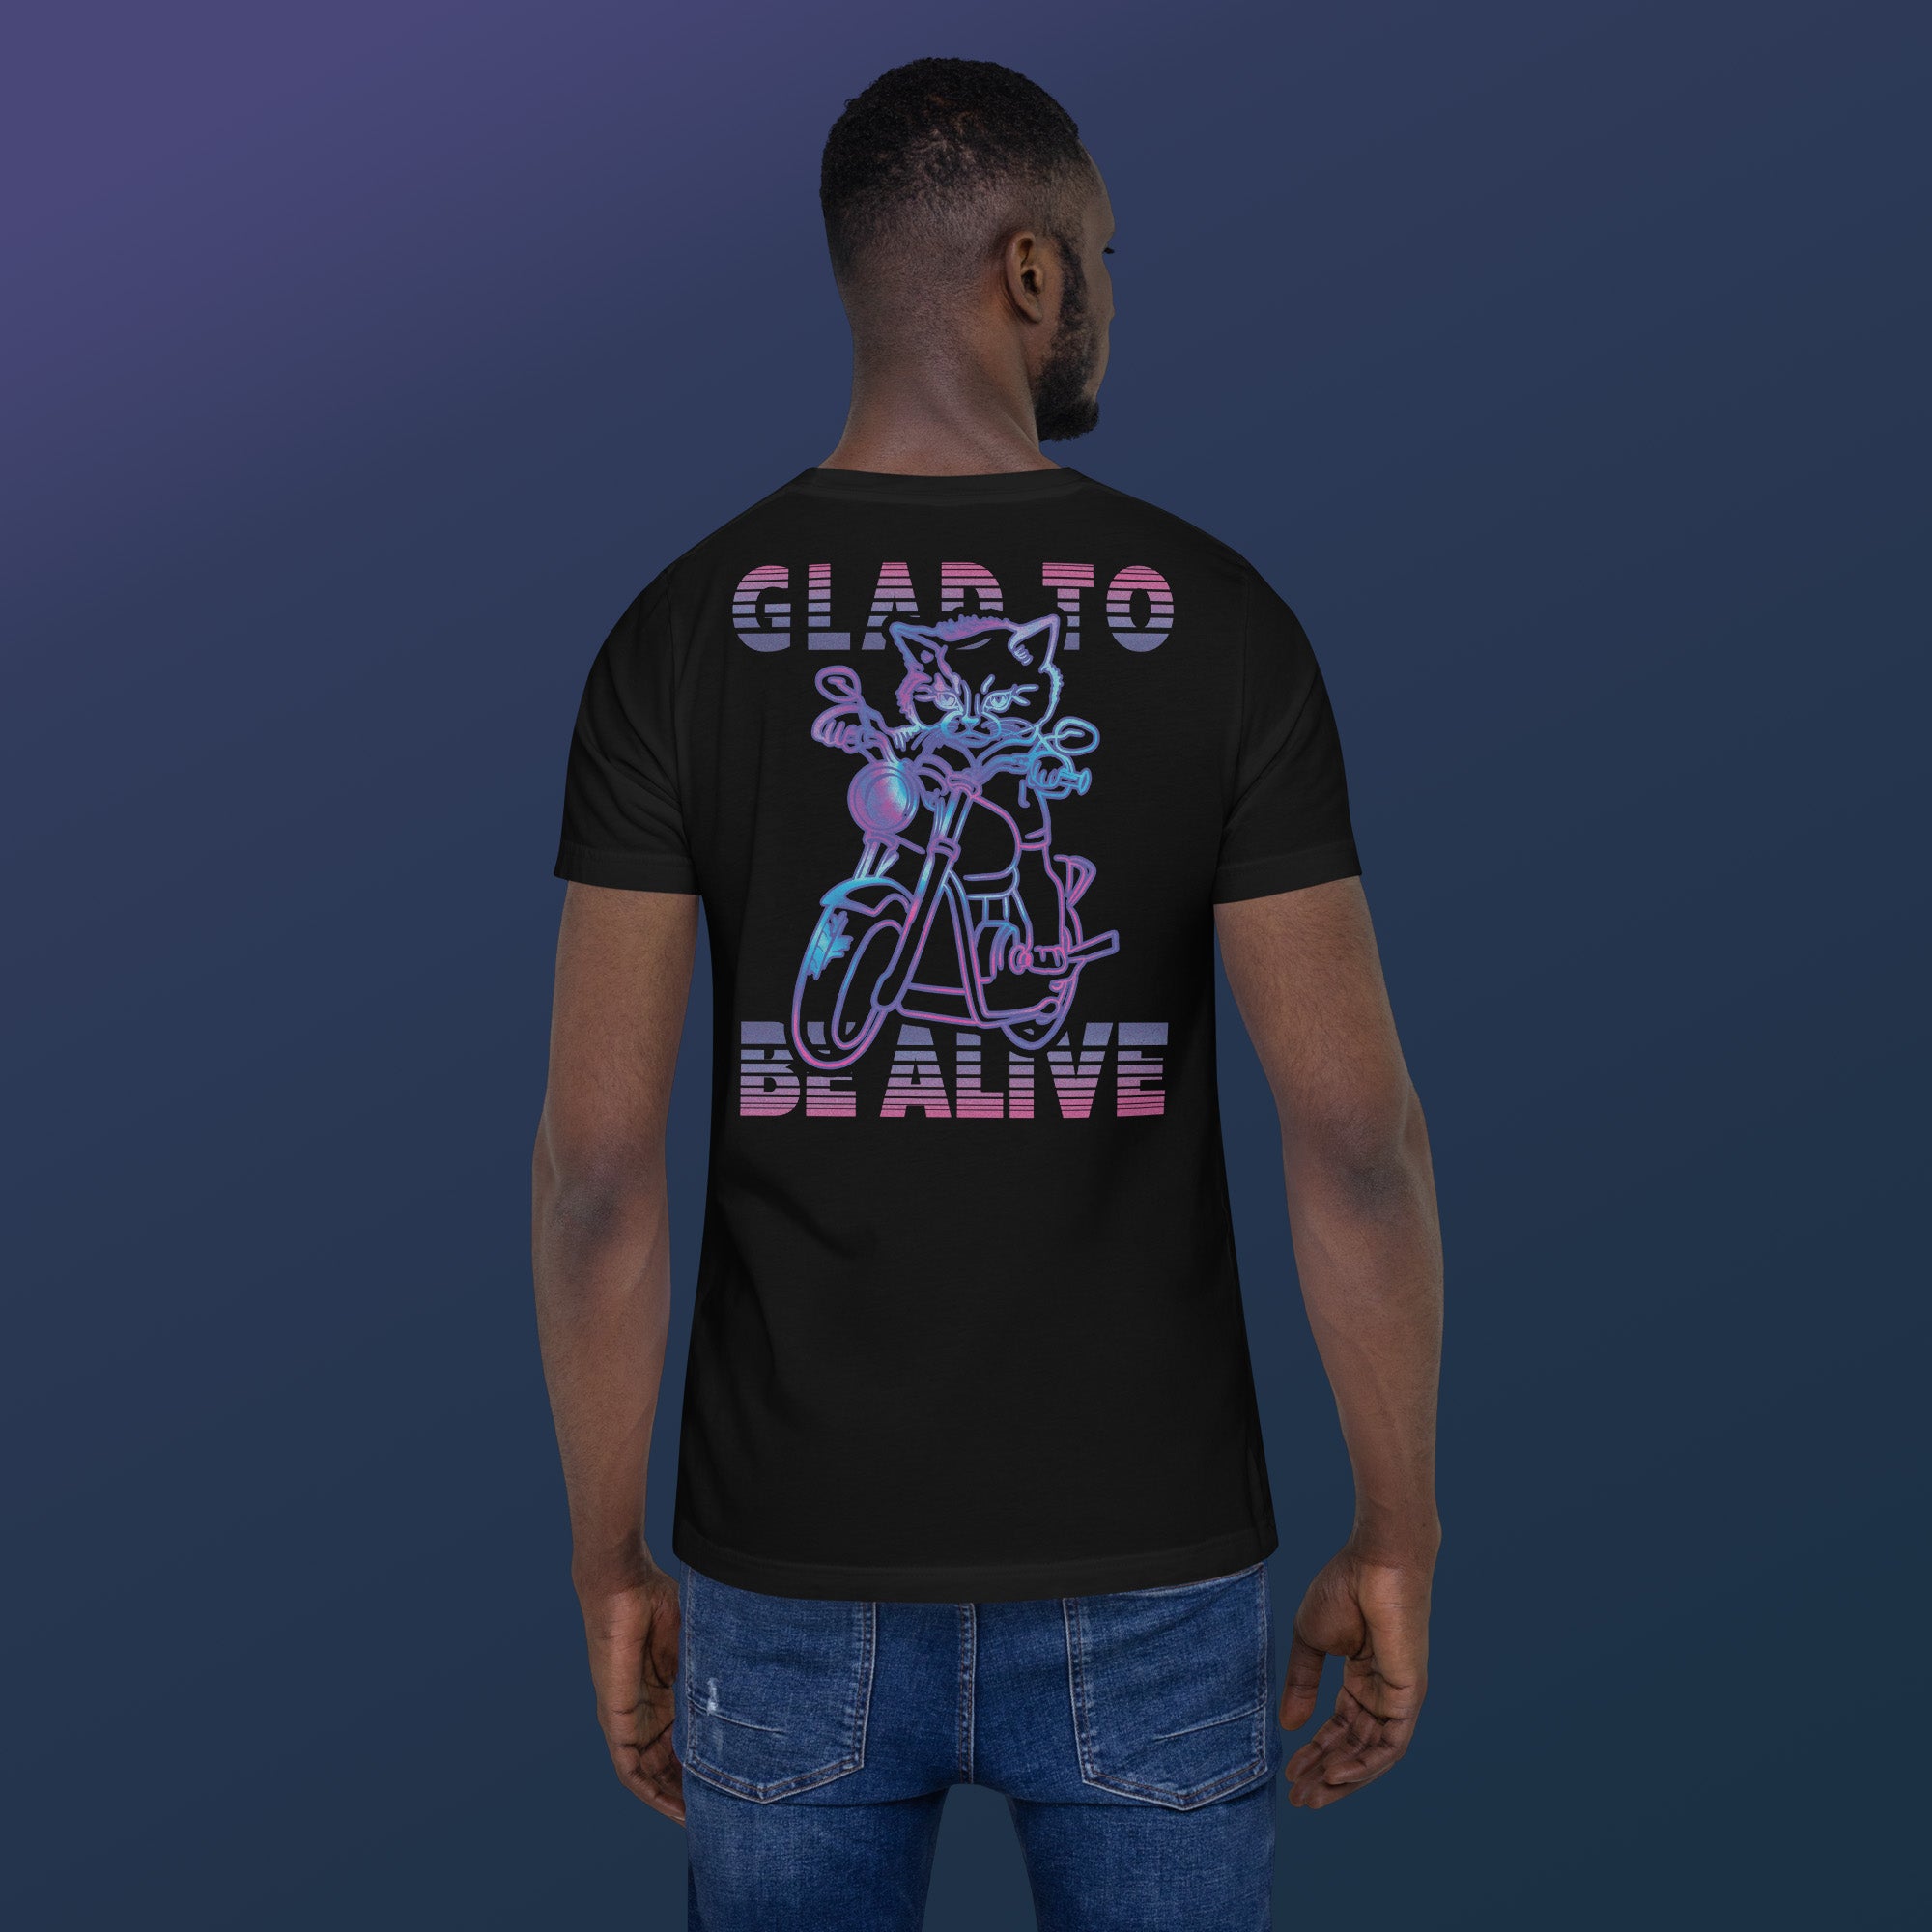 Glad To Be Alive - Cat T-shirt